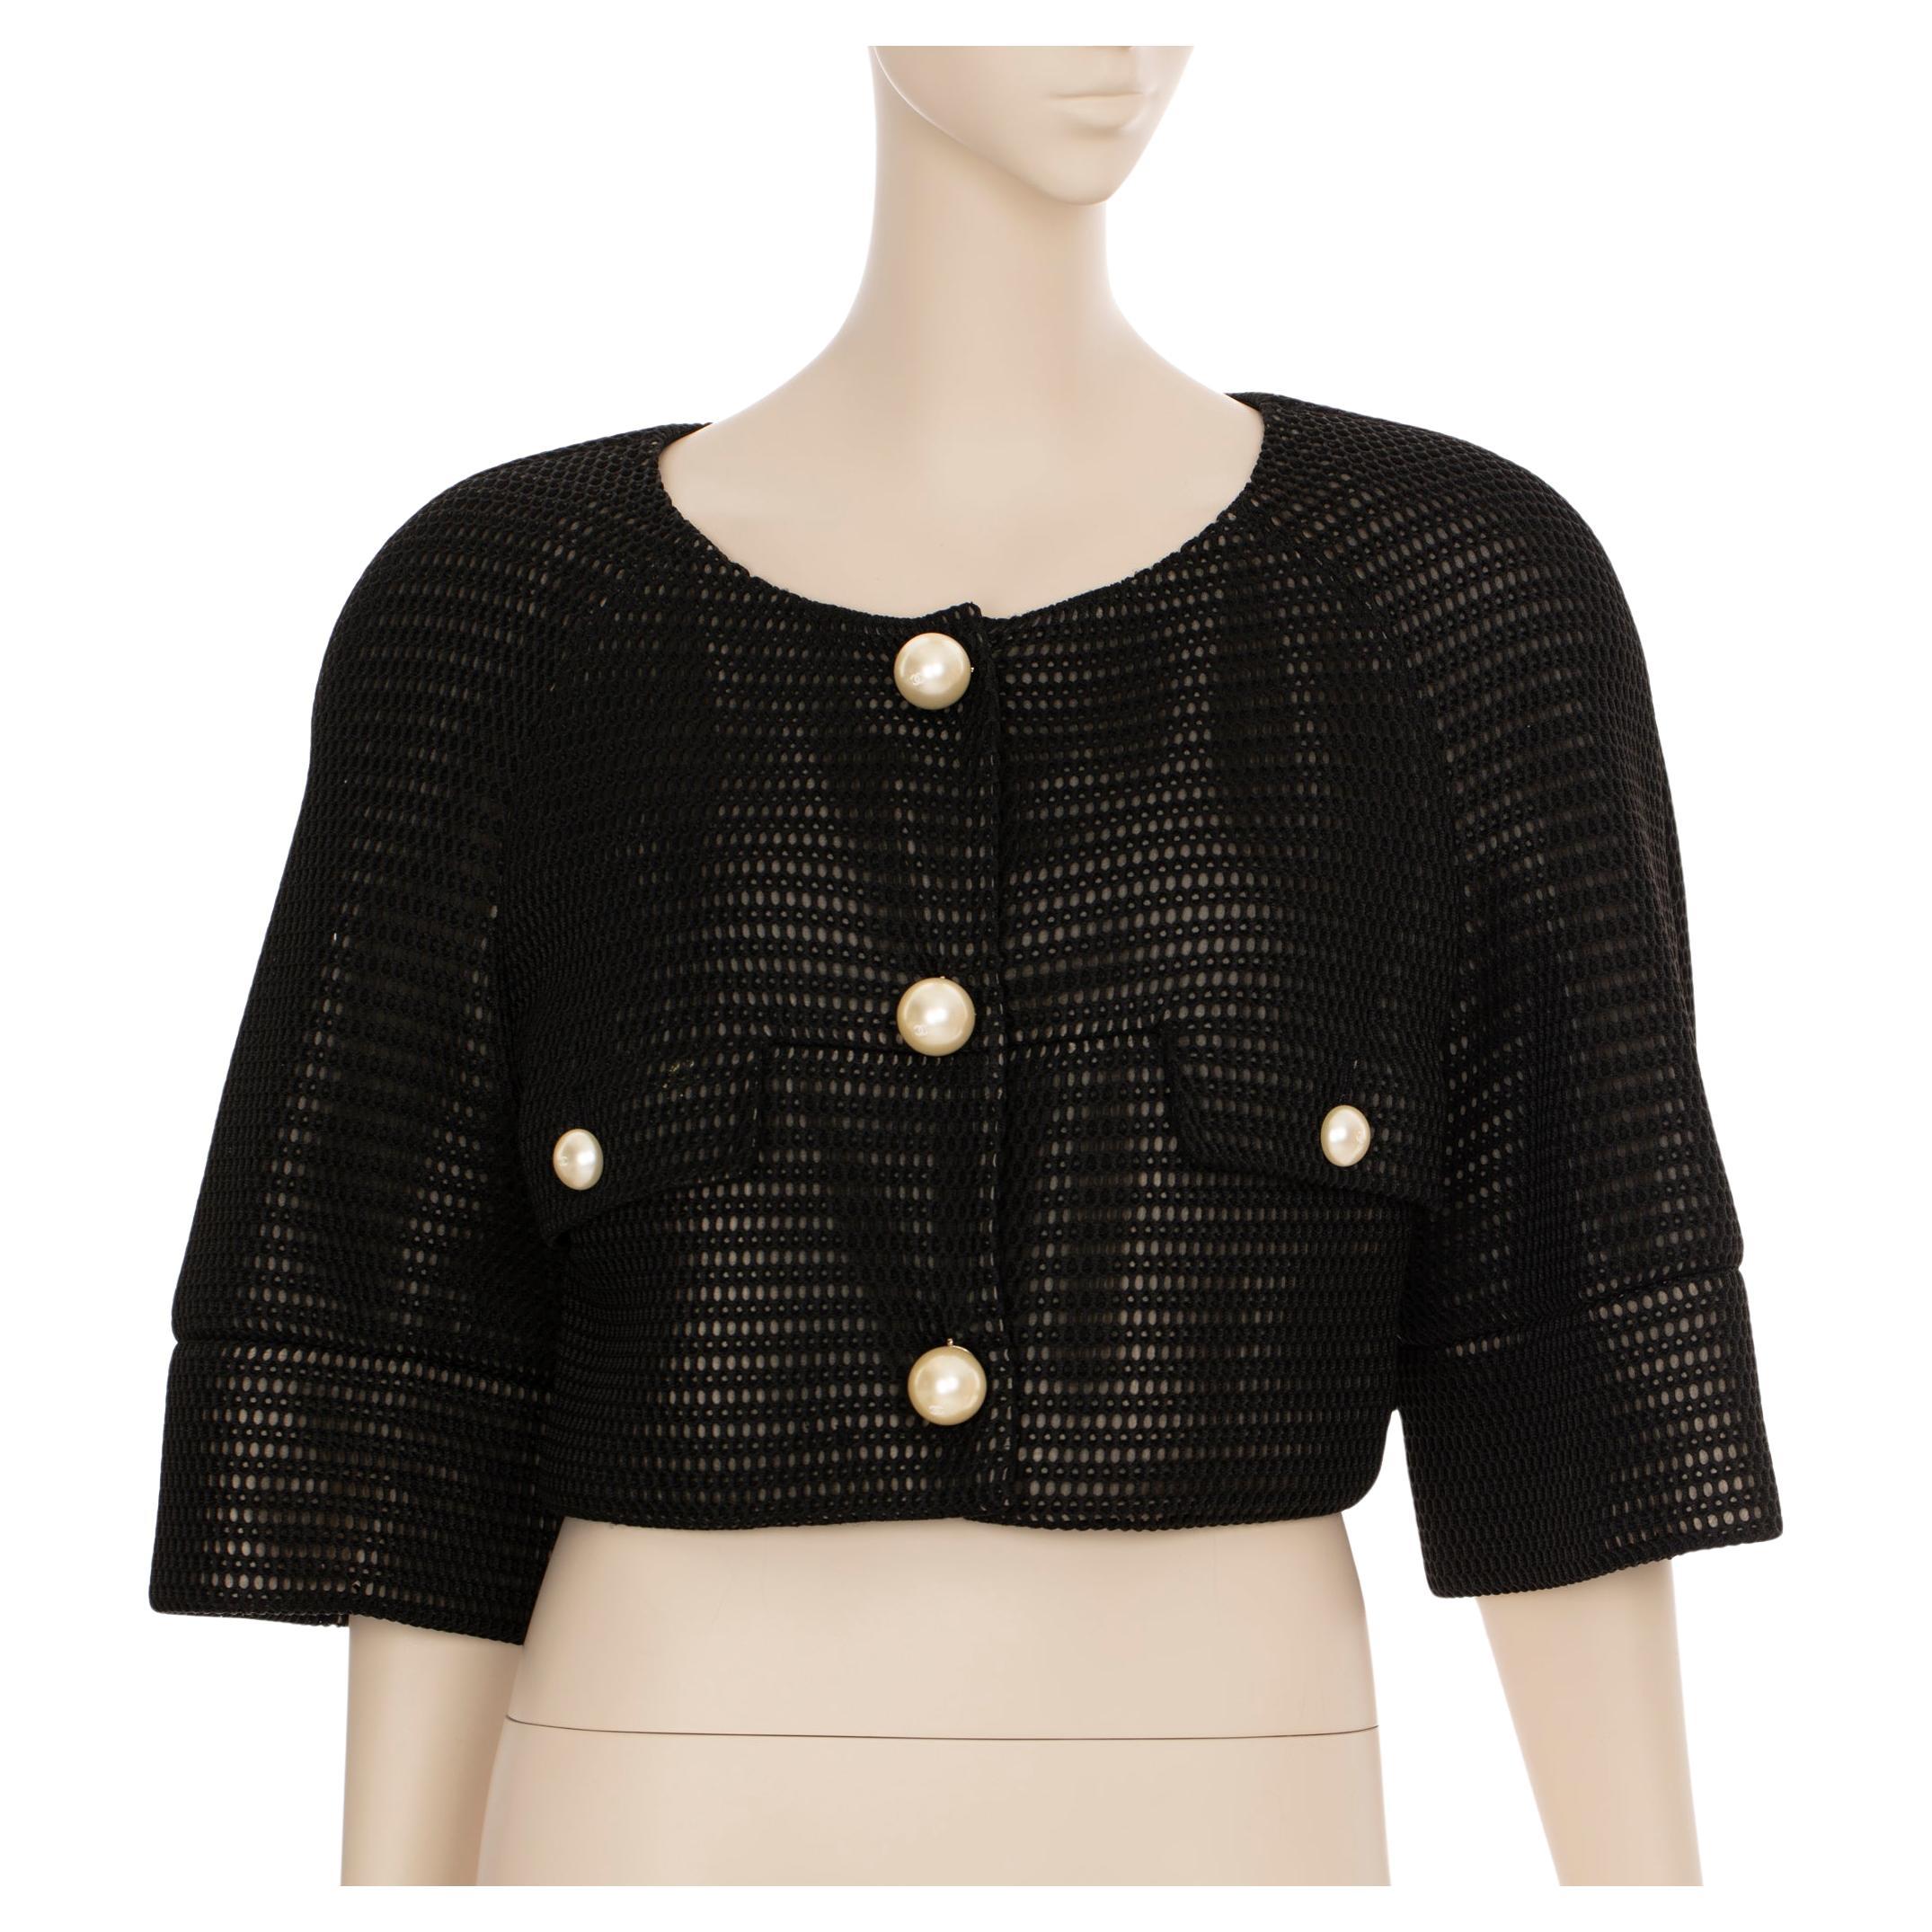 Chanel Crop Mesh Black Jacket With Faux Pearl Details 42 FR For Sale